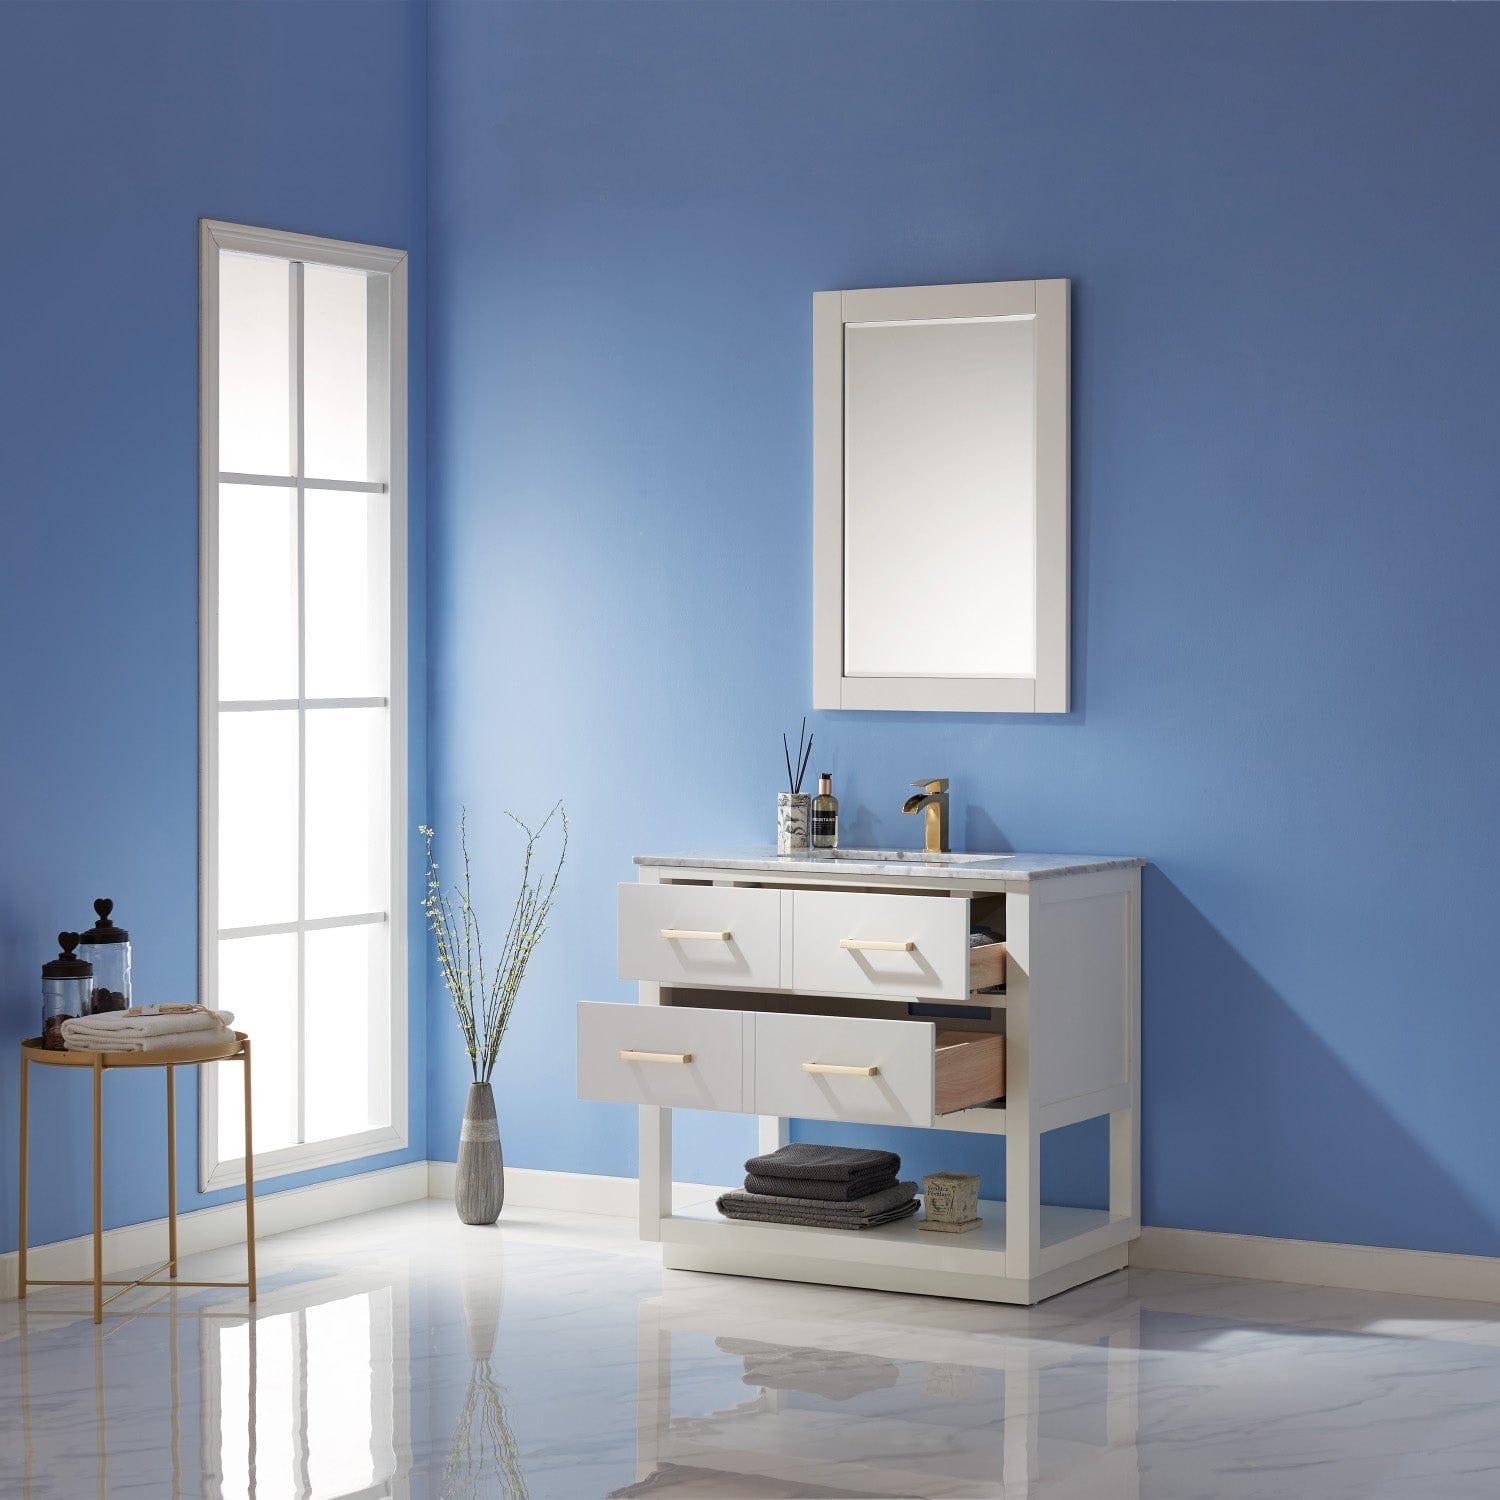 Altair Remi 36" Single Bathroom Vanity Set in White and Carrara White Marble Countertop with Mirror 532036-WH-CA - Molaix631112971430Vanity532036-WH-CA